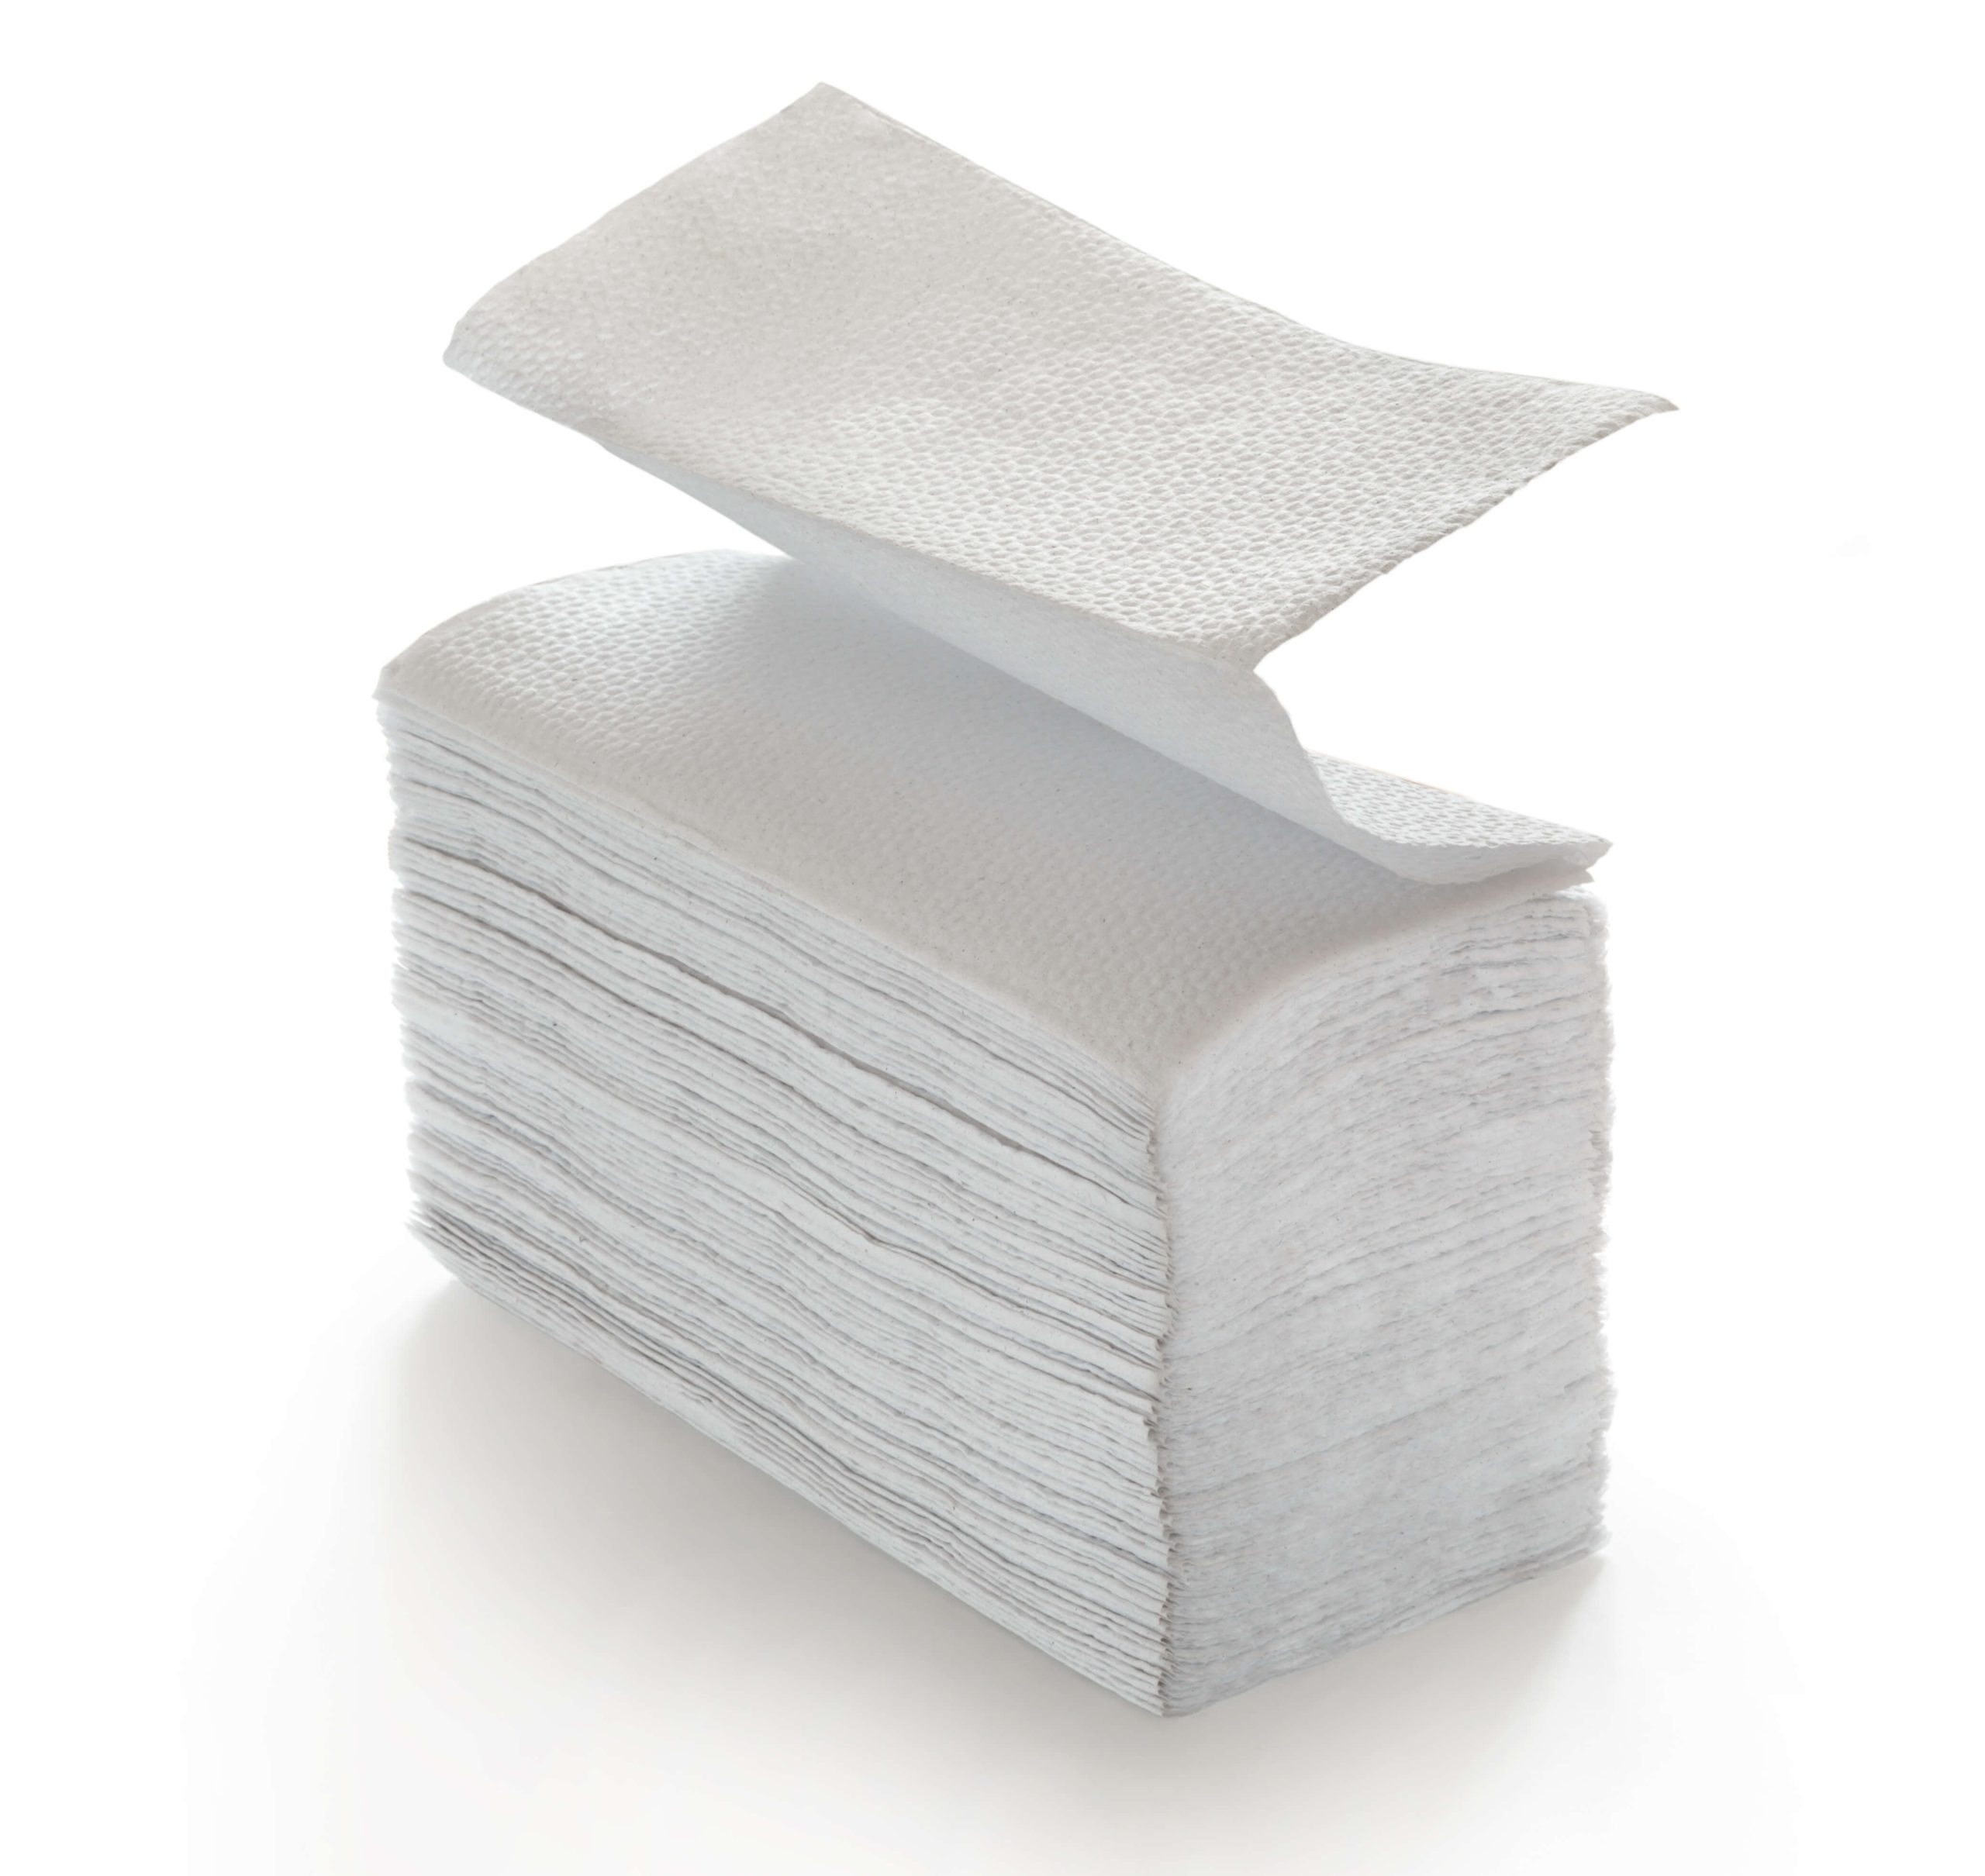 An image of our Disposable Bathroom Hand Towels.